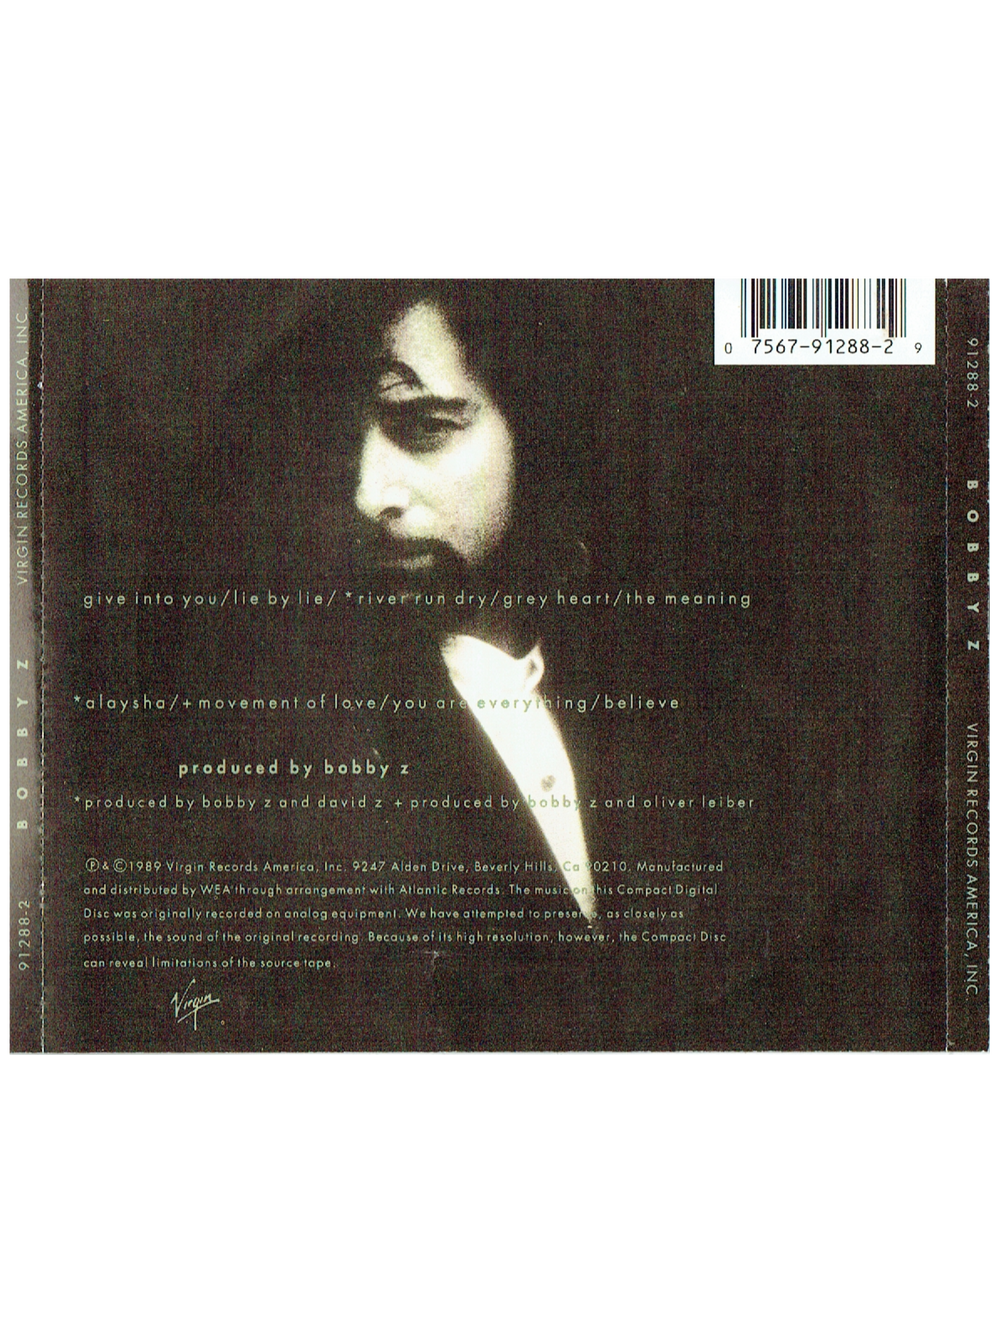 Prince – Bobby Z Self Titled Compact Disc Album 1989 USA Release Prince